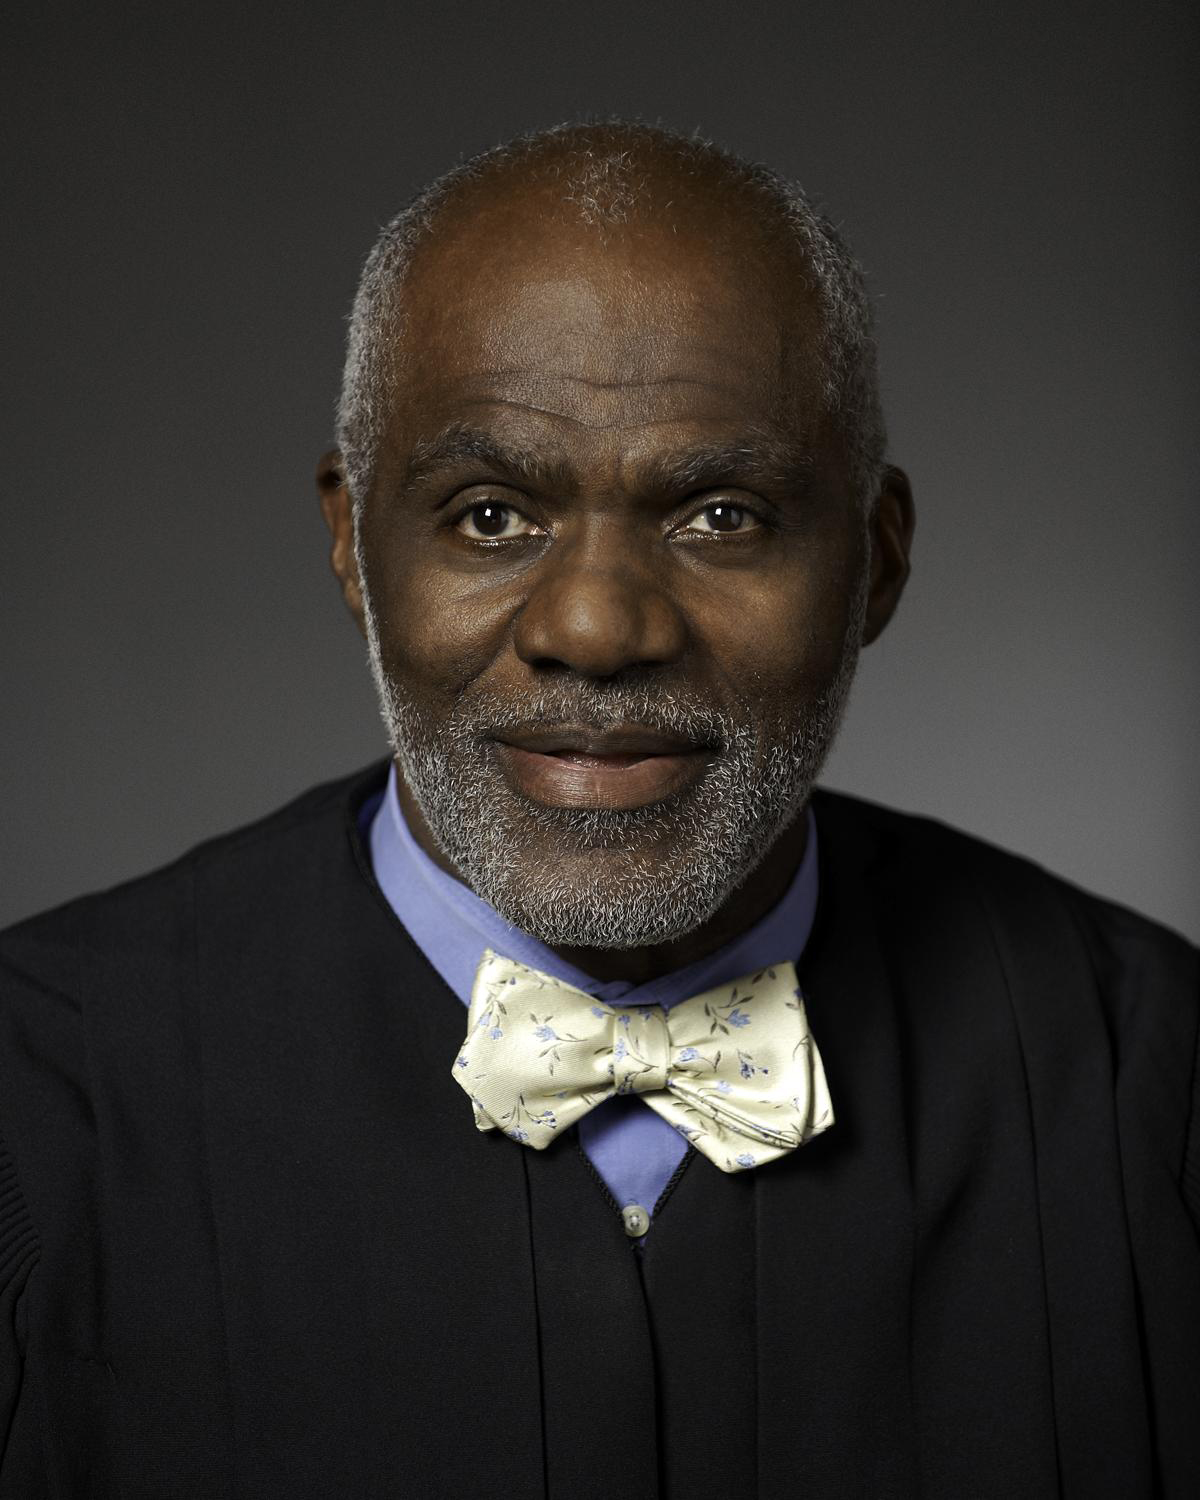 Gustavus to host Justice Alan Page for its MLK Day Celebration - The Jan.  16 event is free and open to the public.Posted on January 9th, 2023 by Luc  Hatlestad